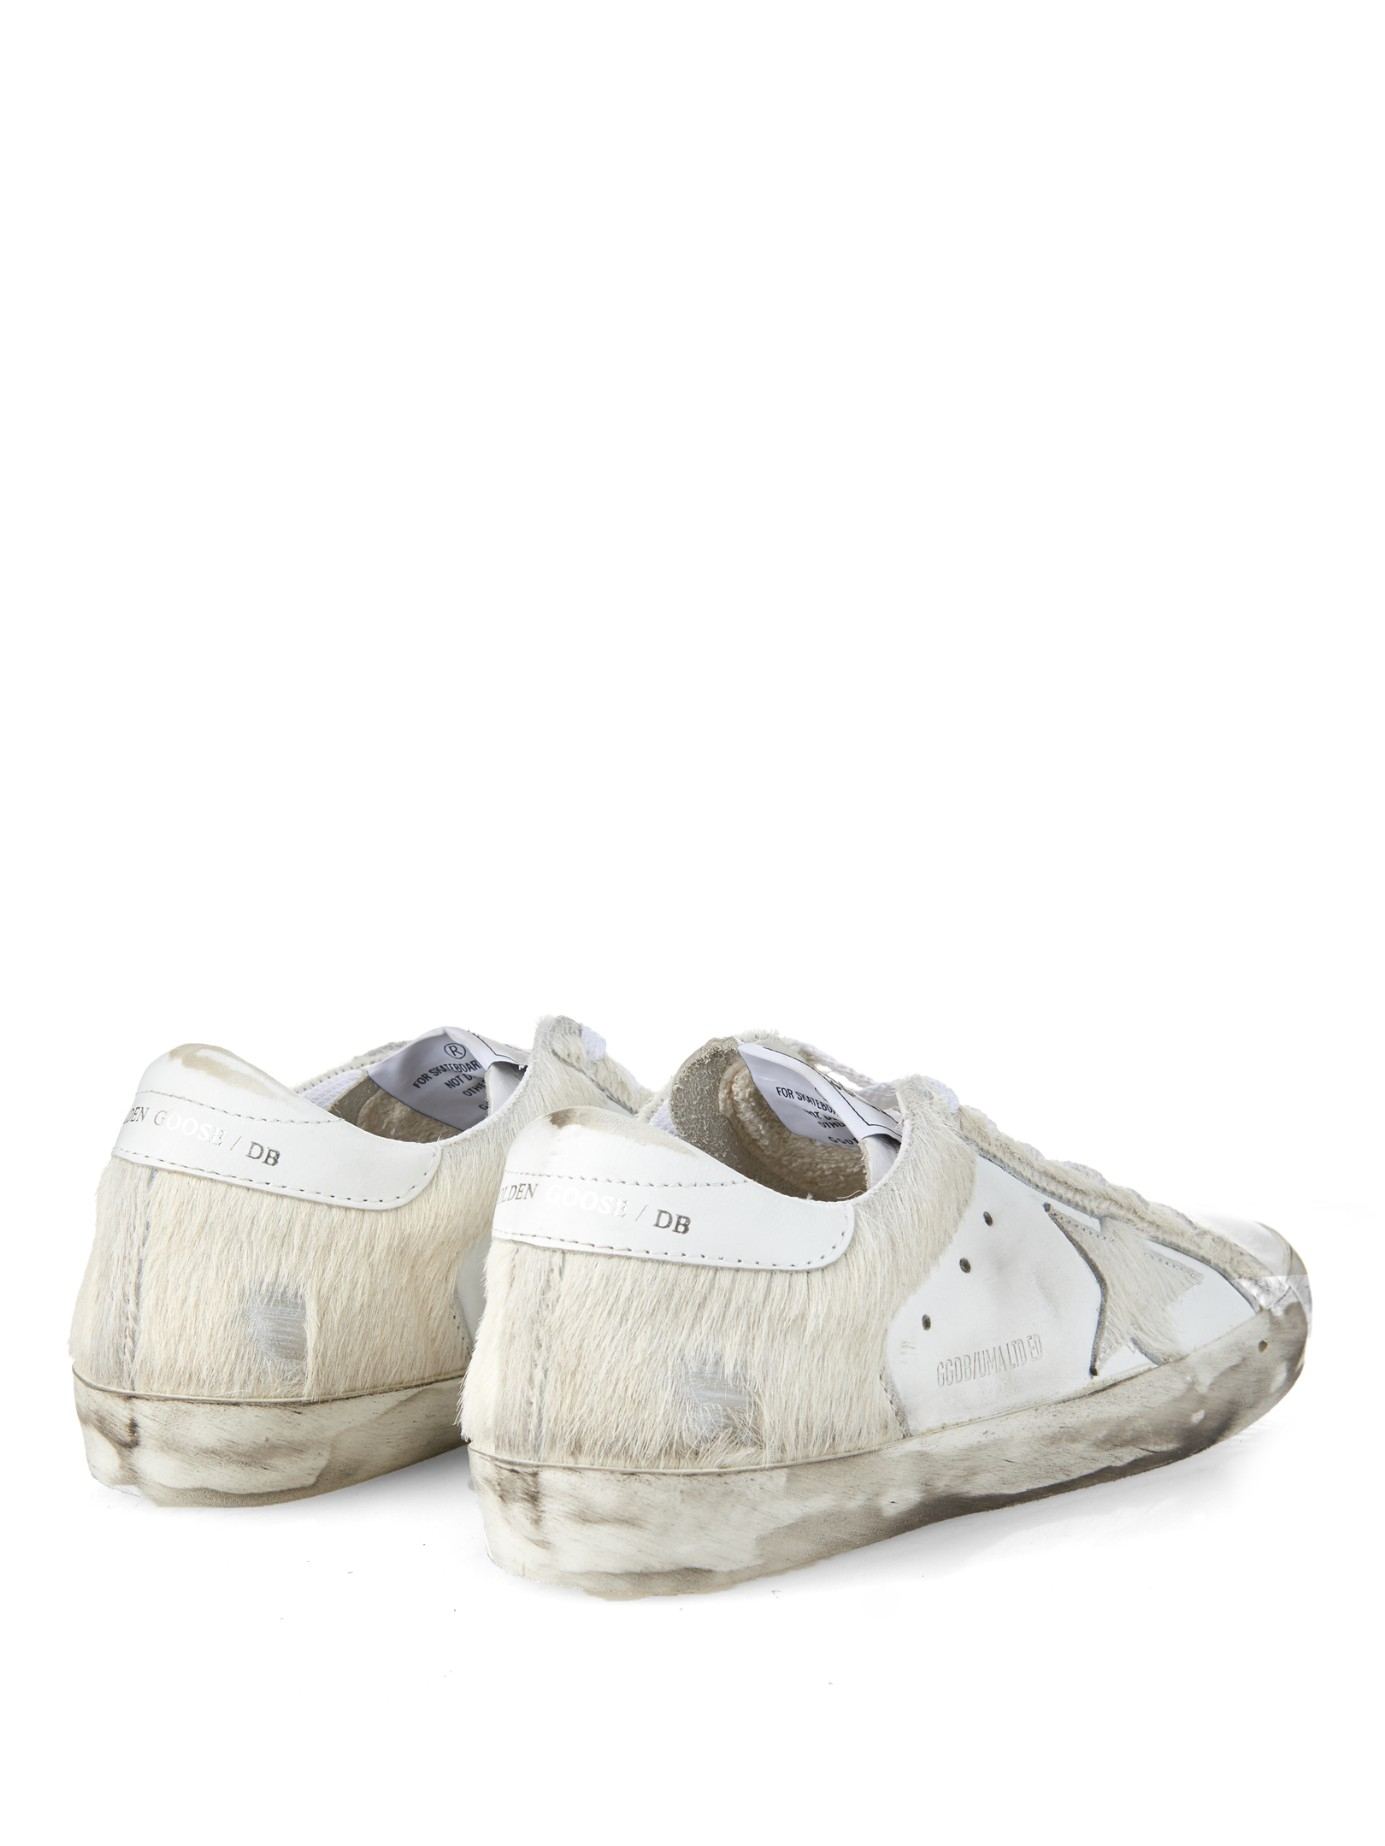 Golden Goose Superstar Uma Calf Hair and Leather Low-Top Sneakers in White  (Gray) - Lyst